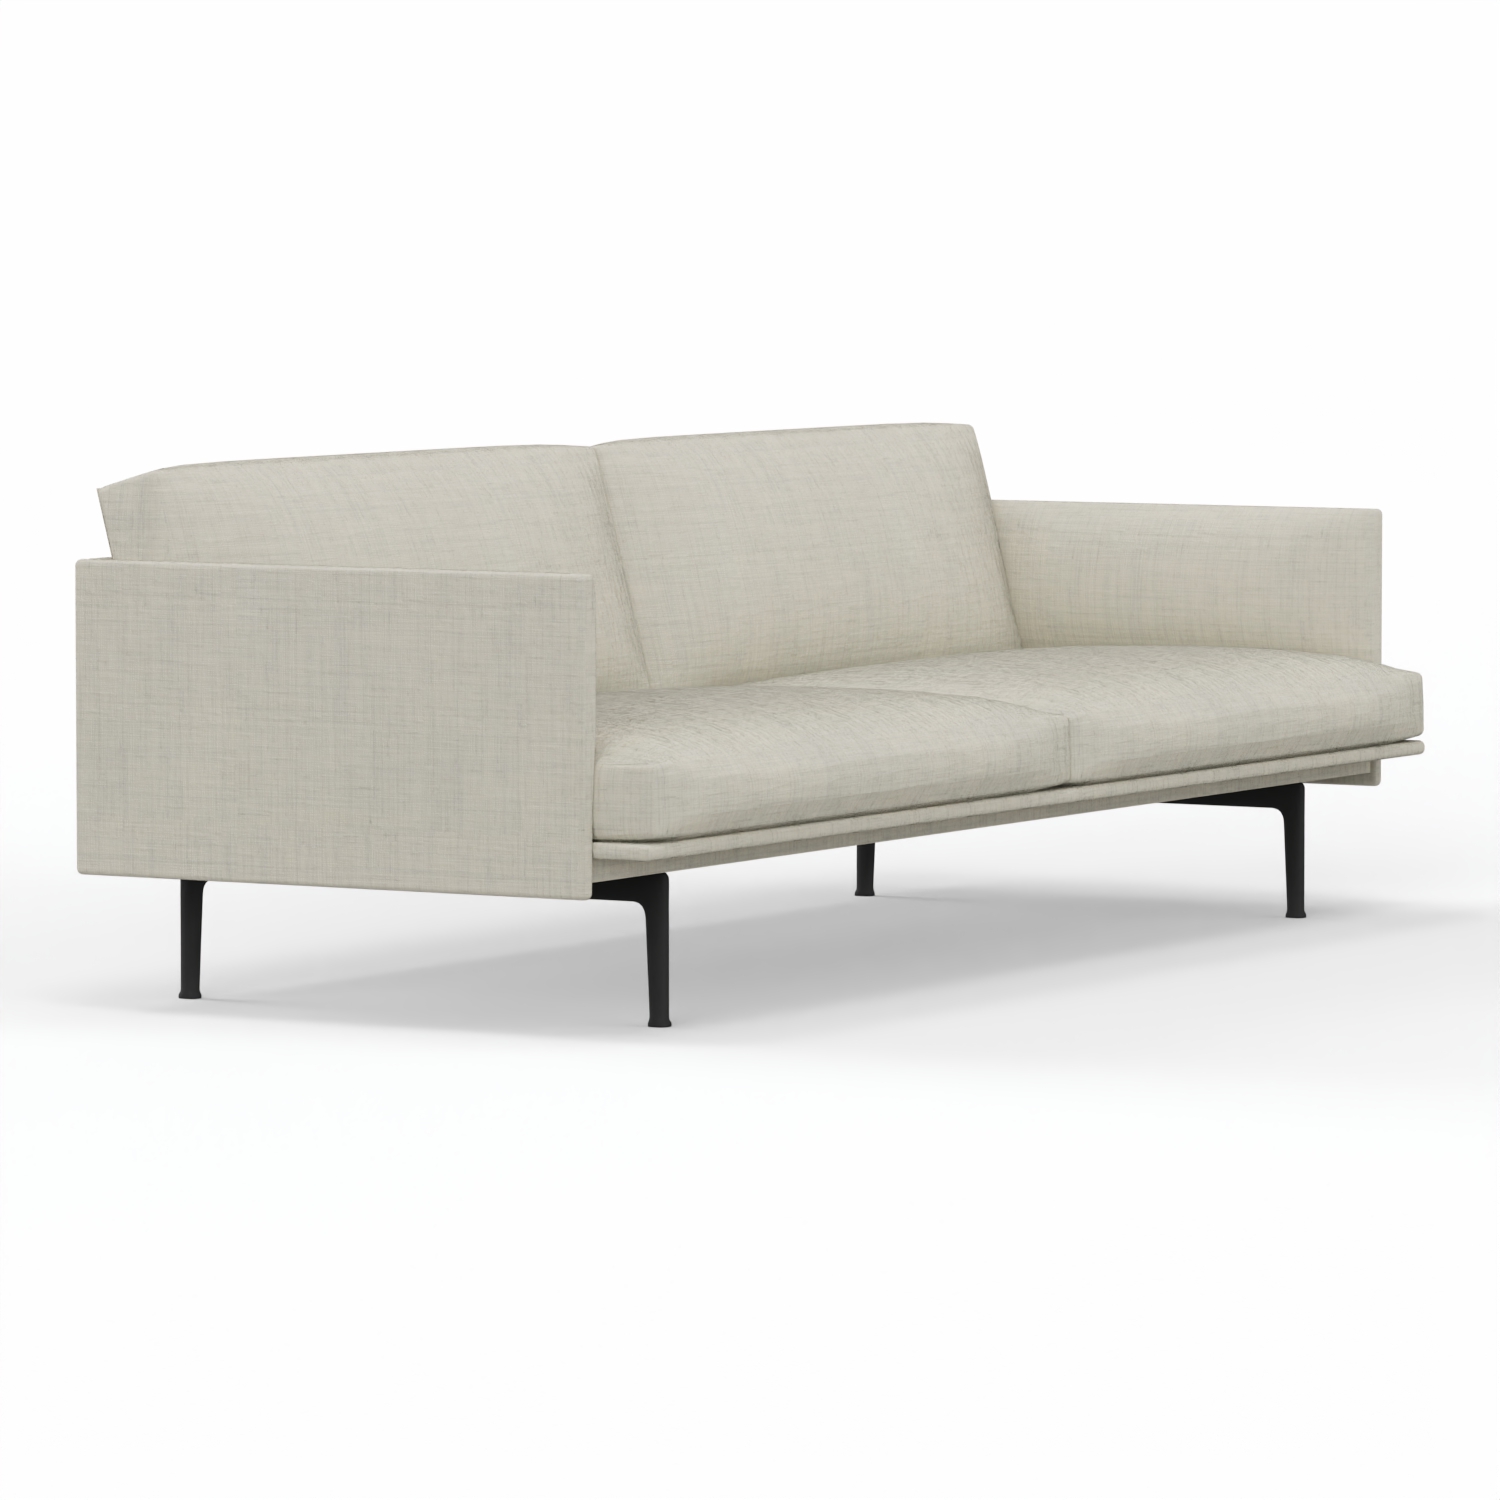 Outline Sofa / 3-SEATER 27028-113